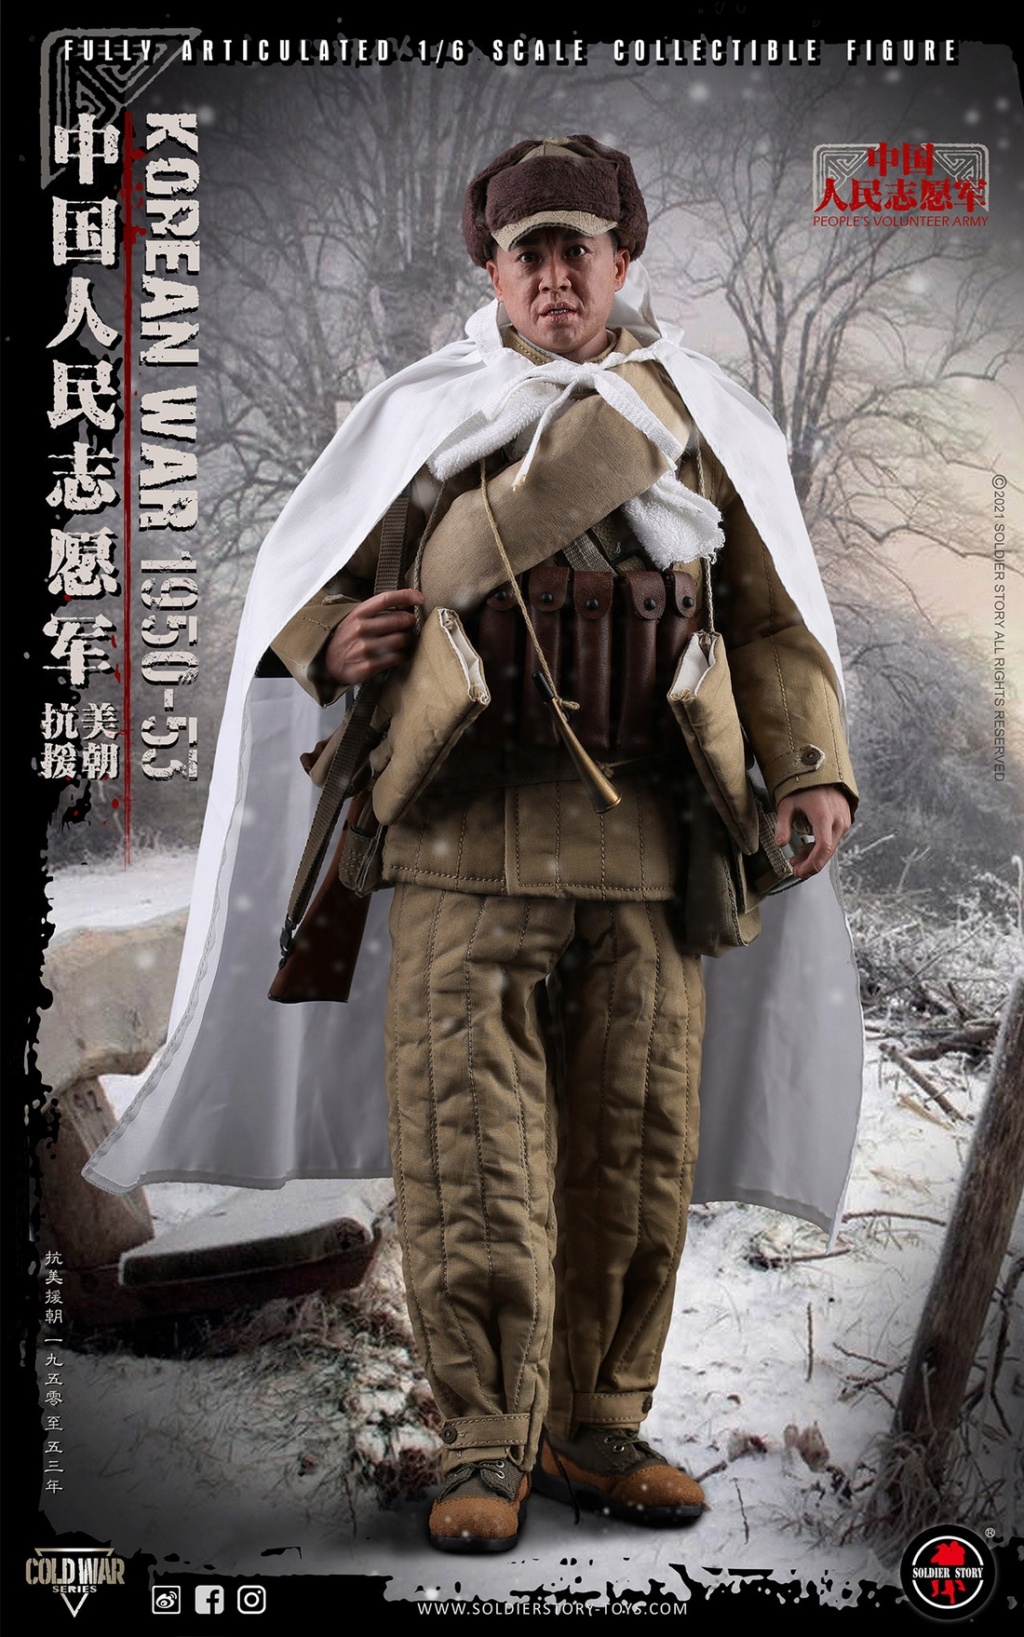 NEW PRODUCT: SOLDIER STORY: 1/6 Chinese People’s Volunteers 1950-53 Collectible Action Figure (#SS-124) 4c6eaa10